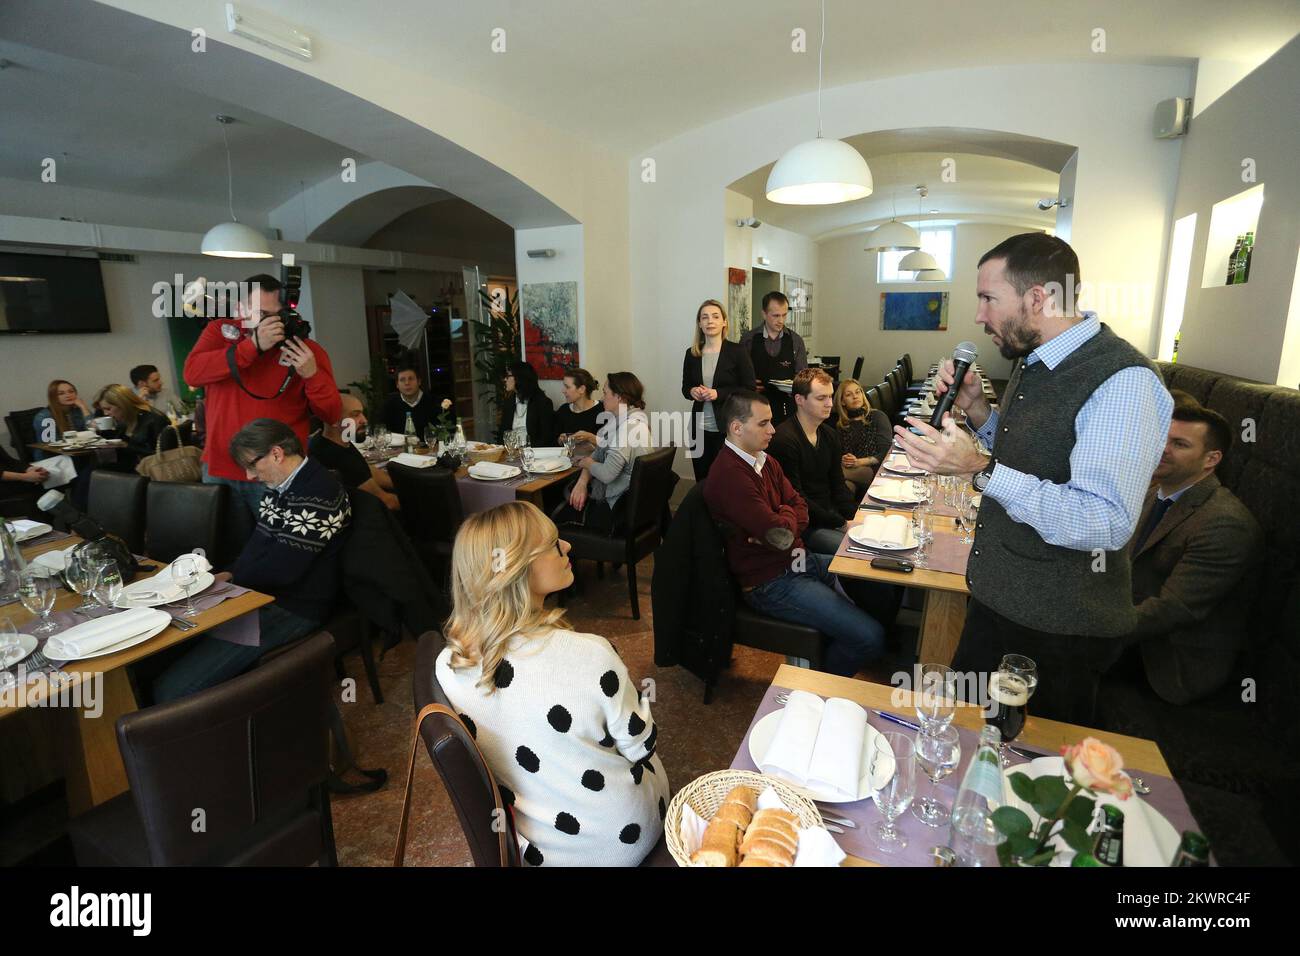 25.02.2014., Zagreb, Croatia - Press lunch with Wolfgang Lindell, beer sommelier and master of brewery - theme of the lunch was popularization of beer in cooking. Photo: Sanjin Strukic/PIXSELL Stock Photo